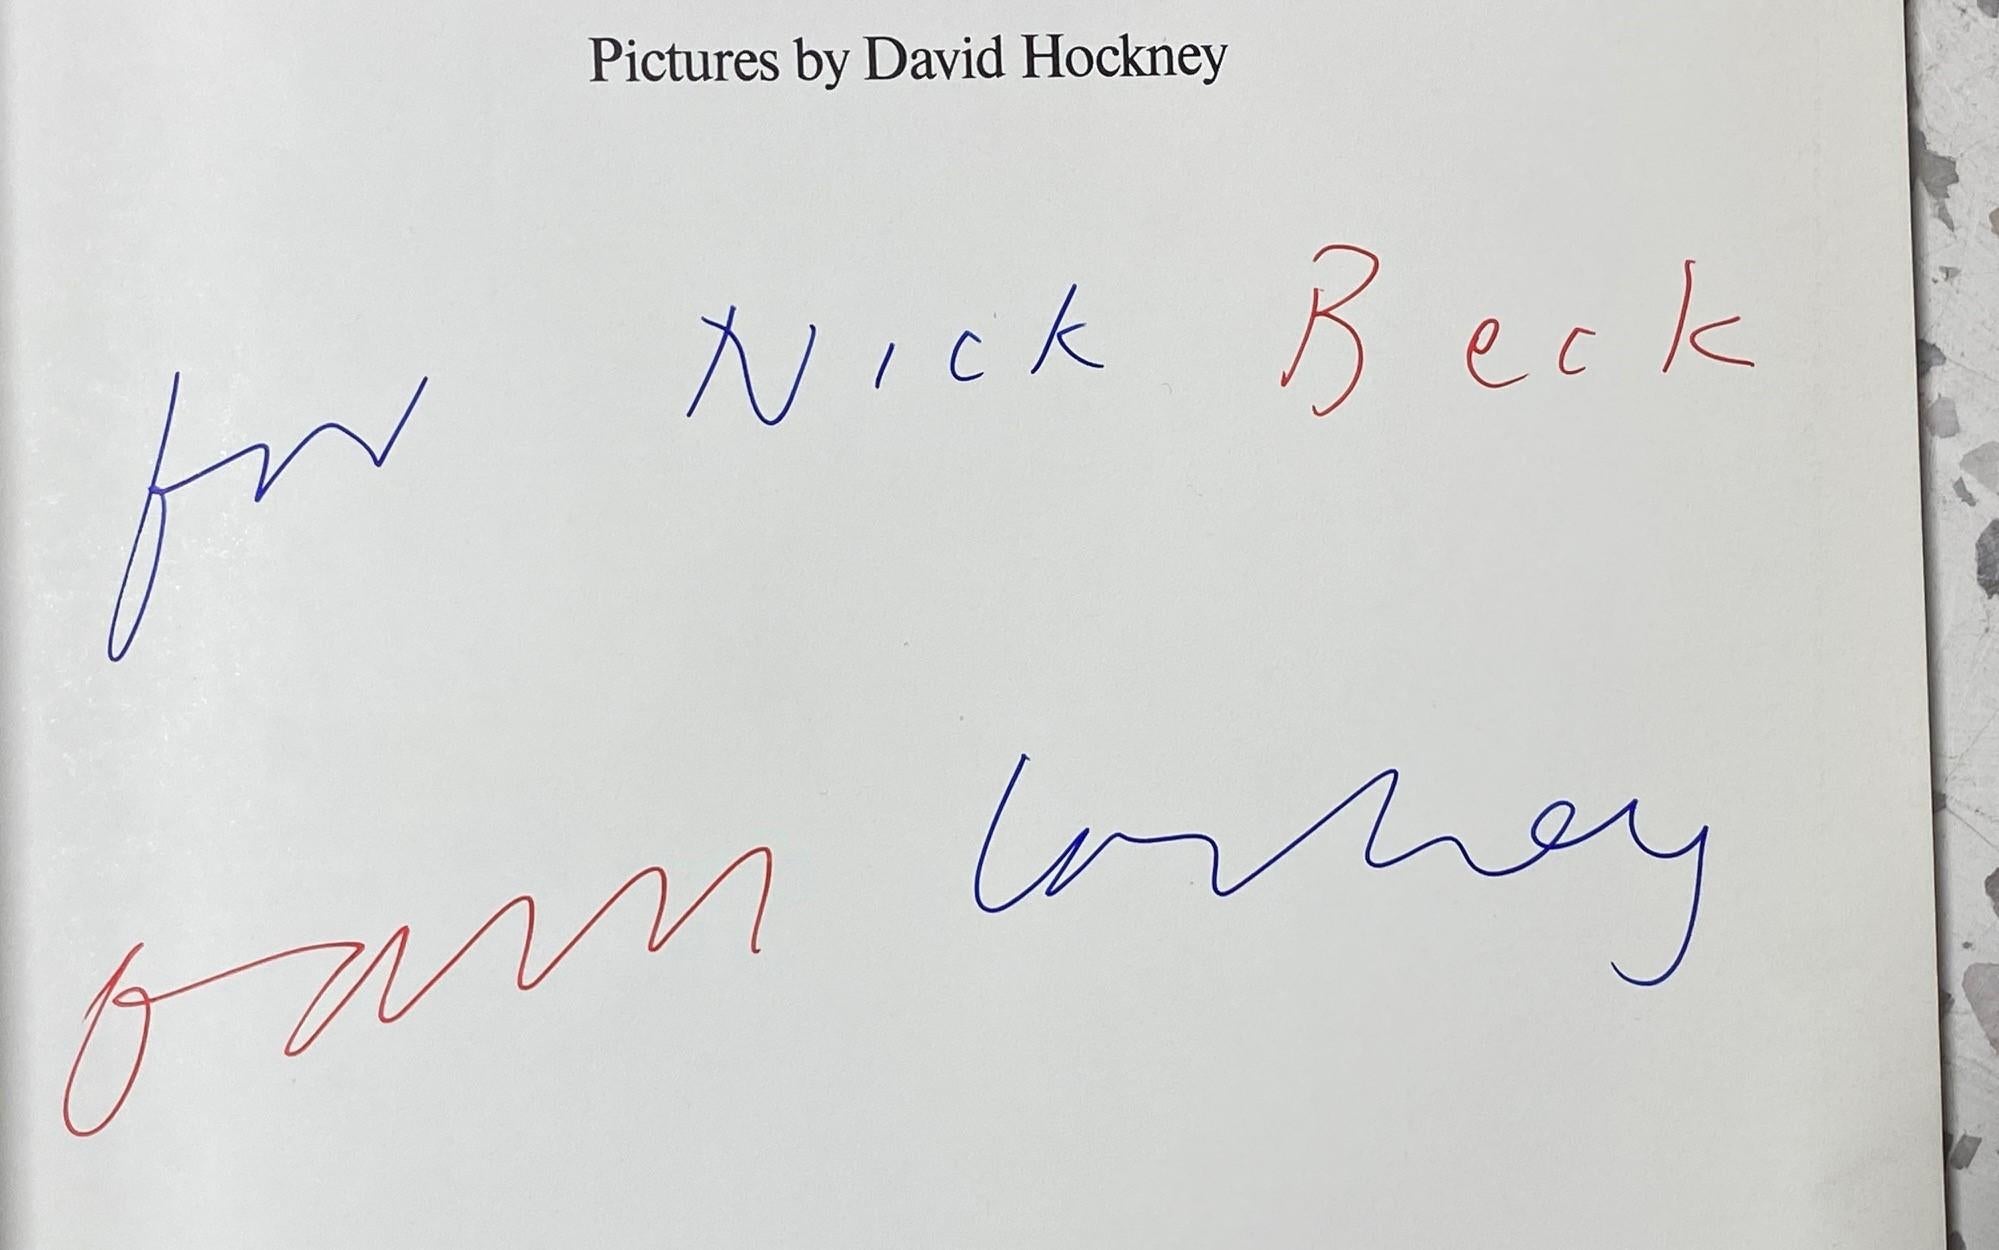 David Hockney Hand Signed First Edition Book Pictures by David Hockney, 1979 For Sale 2